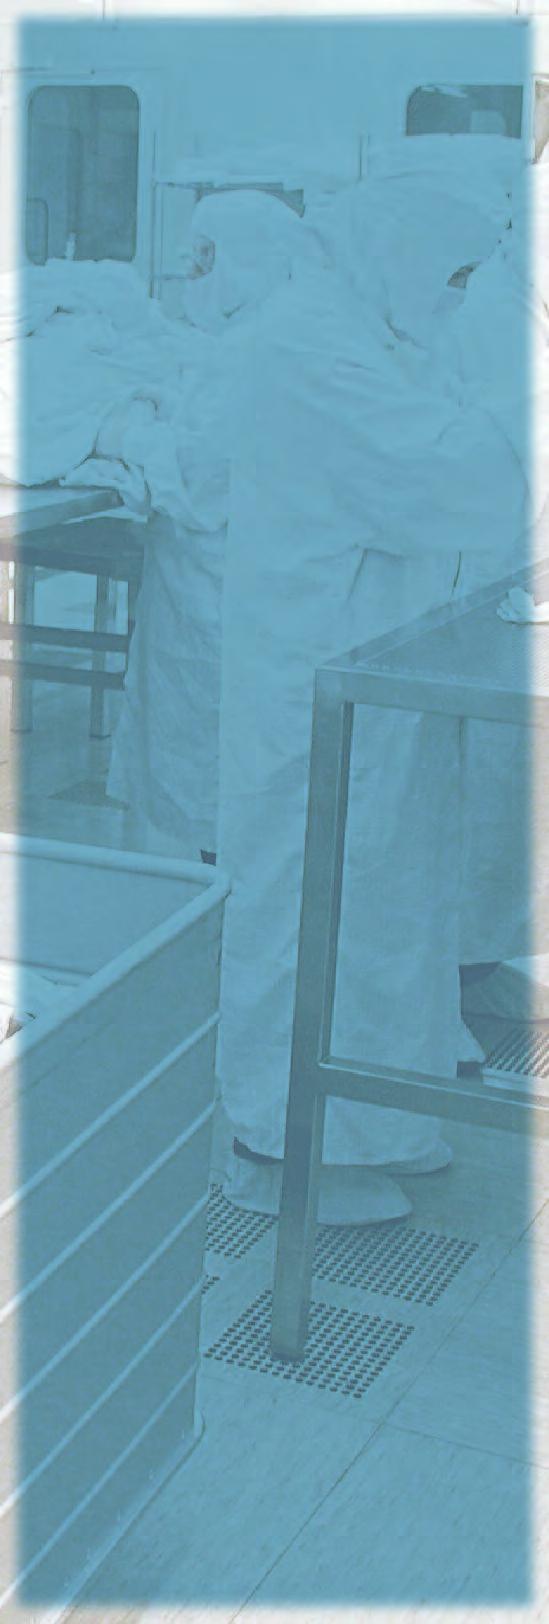 For more than 20 years the WZB has been shipping professionally prepared cleanroom garments to its customers